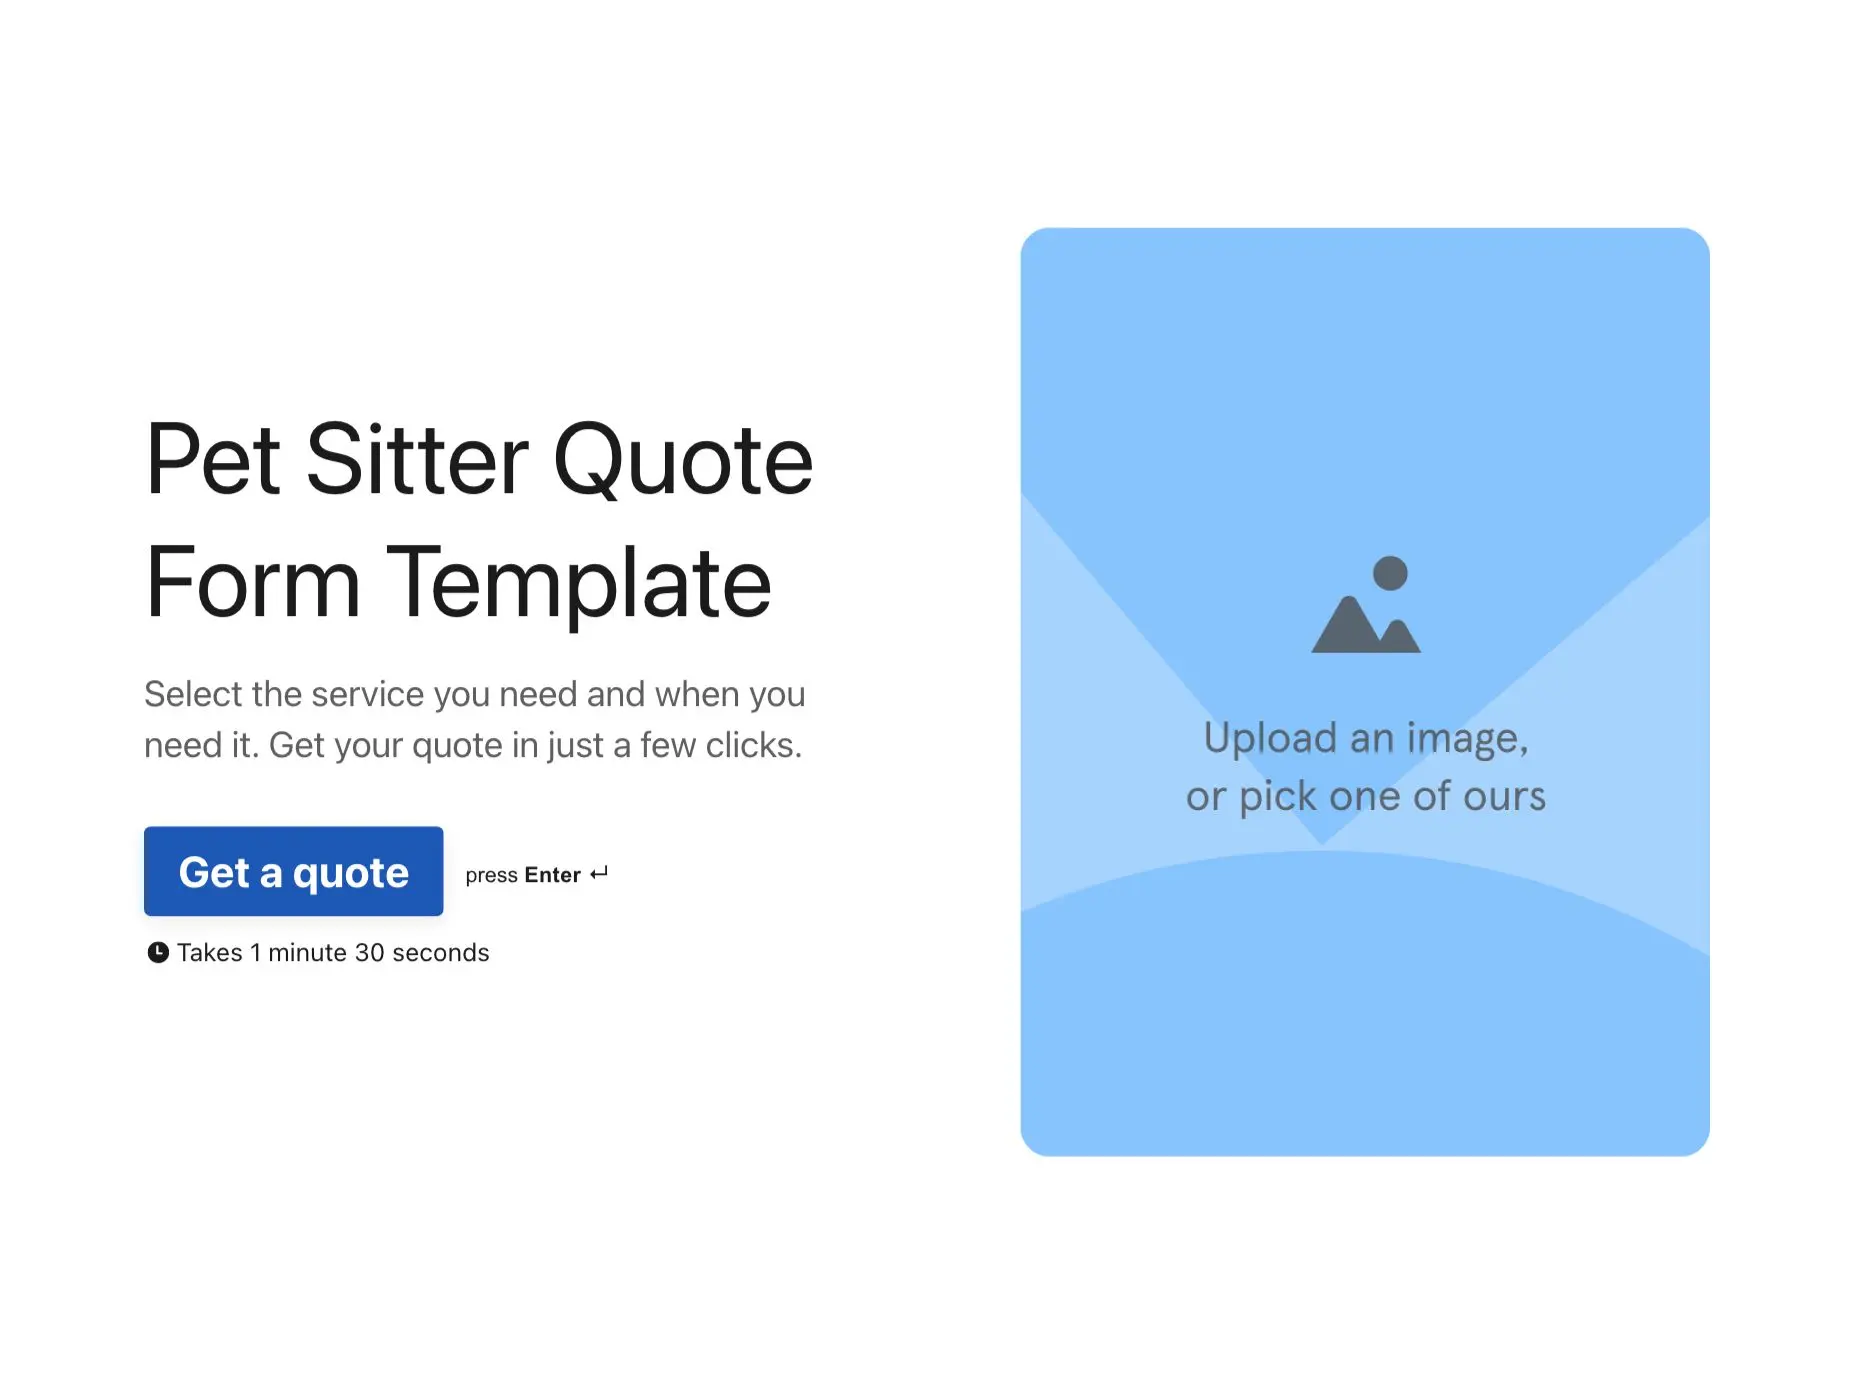 Pet Sitter Quote Form Template Hero